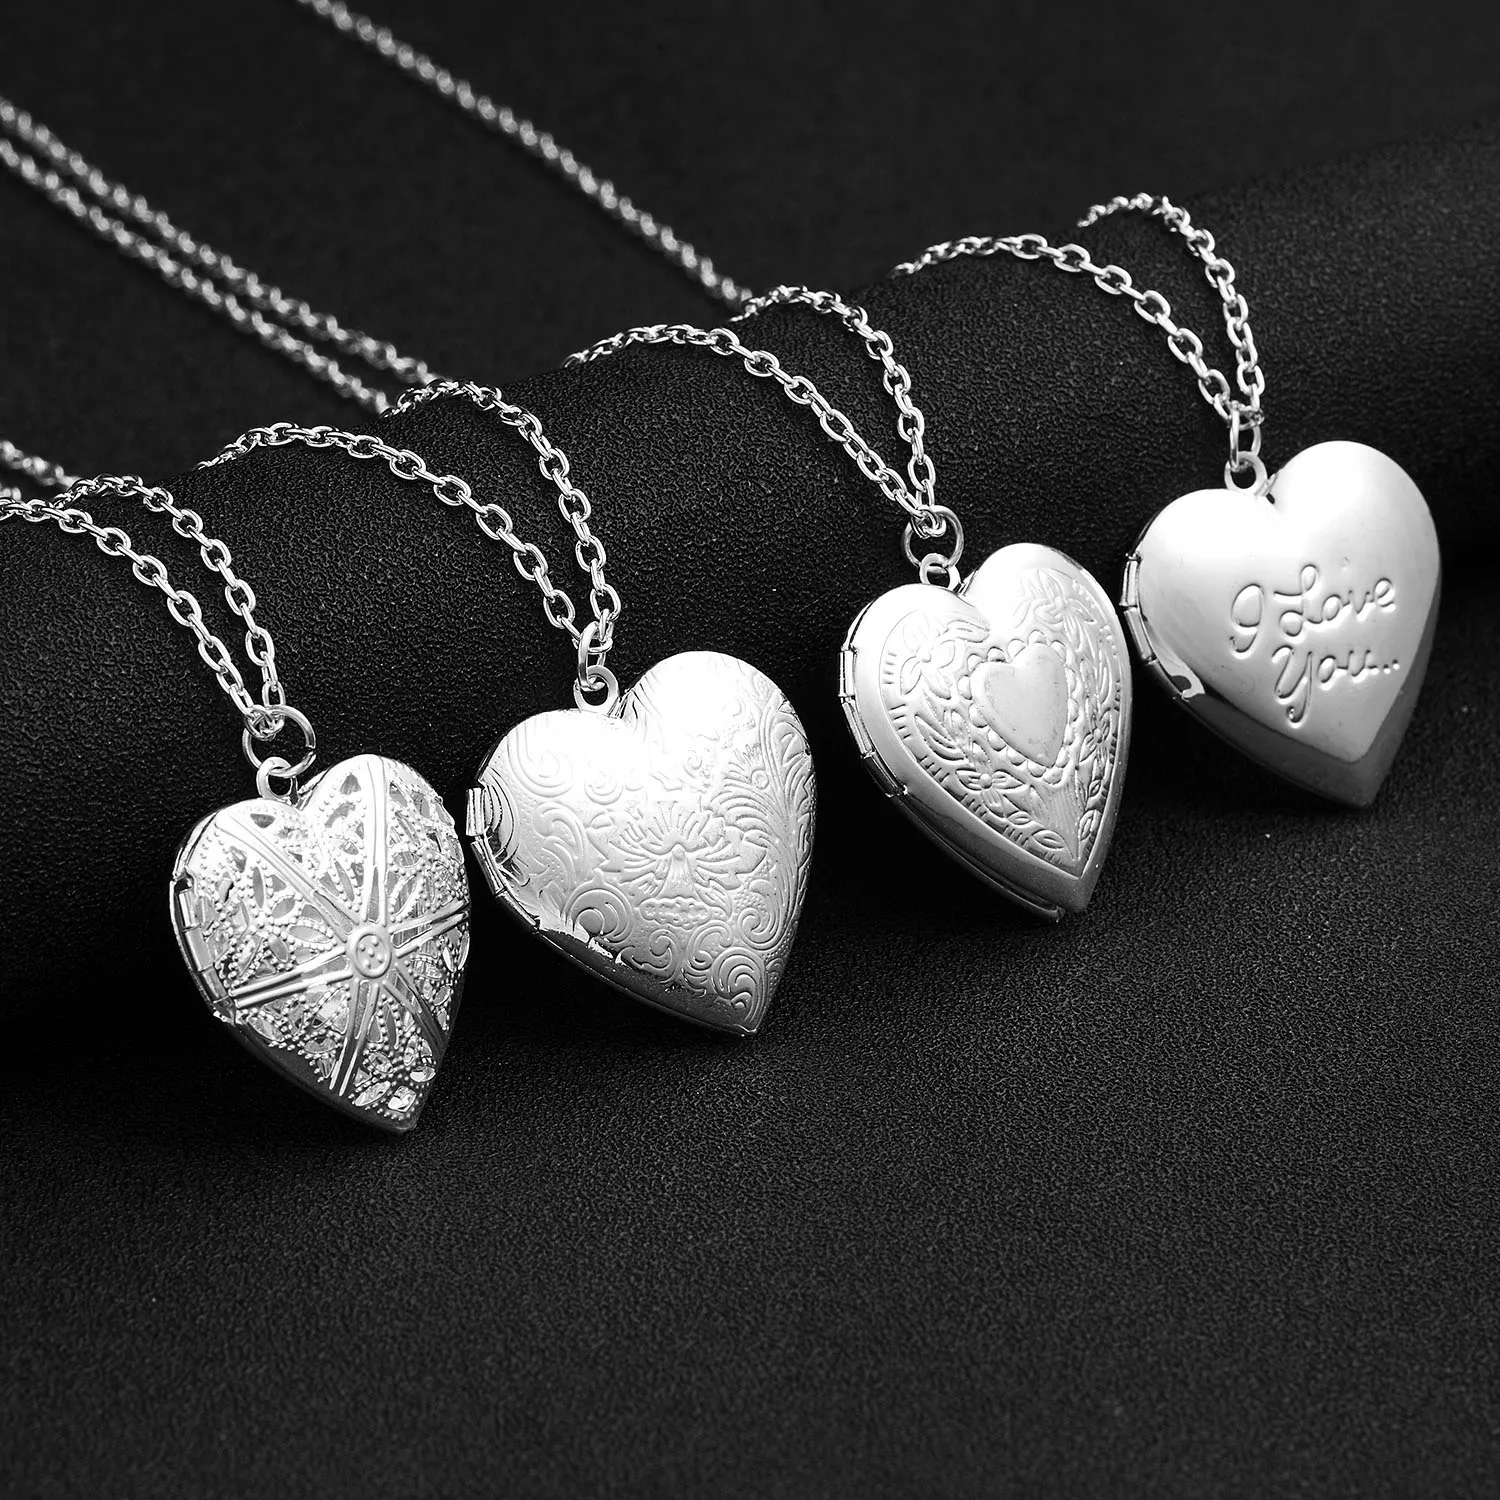 Unique Carved Design Heart-shaped Photo Frame Pendant Necklace Charm Openable Locket Necklaces Women Men Memorial Jewelry images - 6